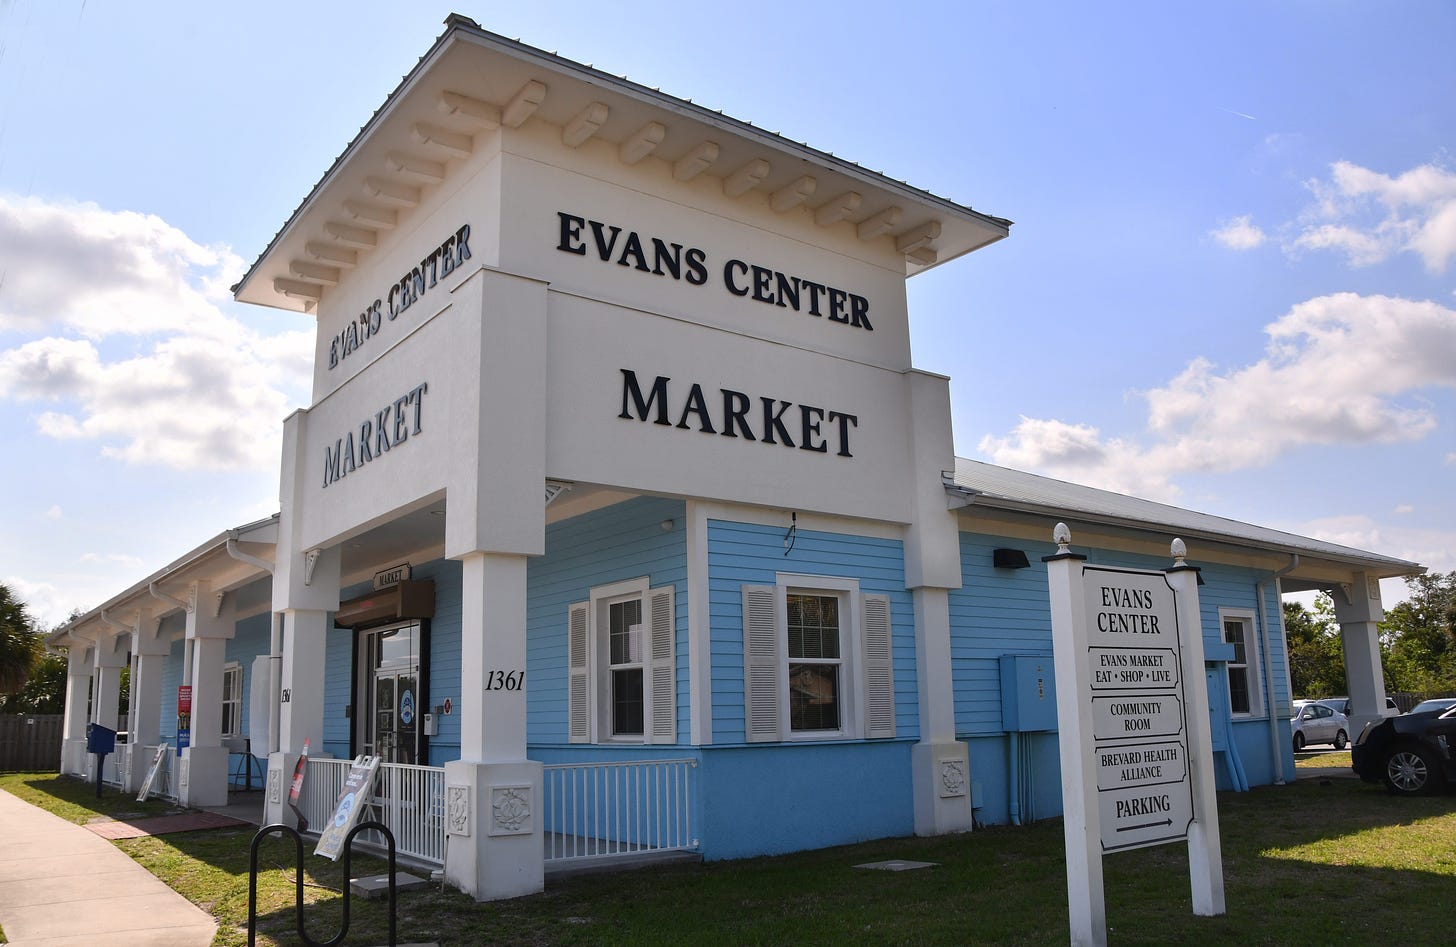 Officials: Evans Center in Palm Bay will close market by end of month